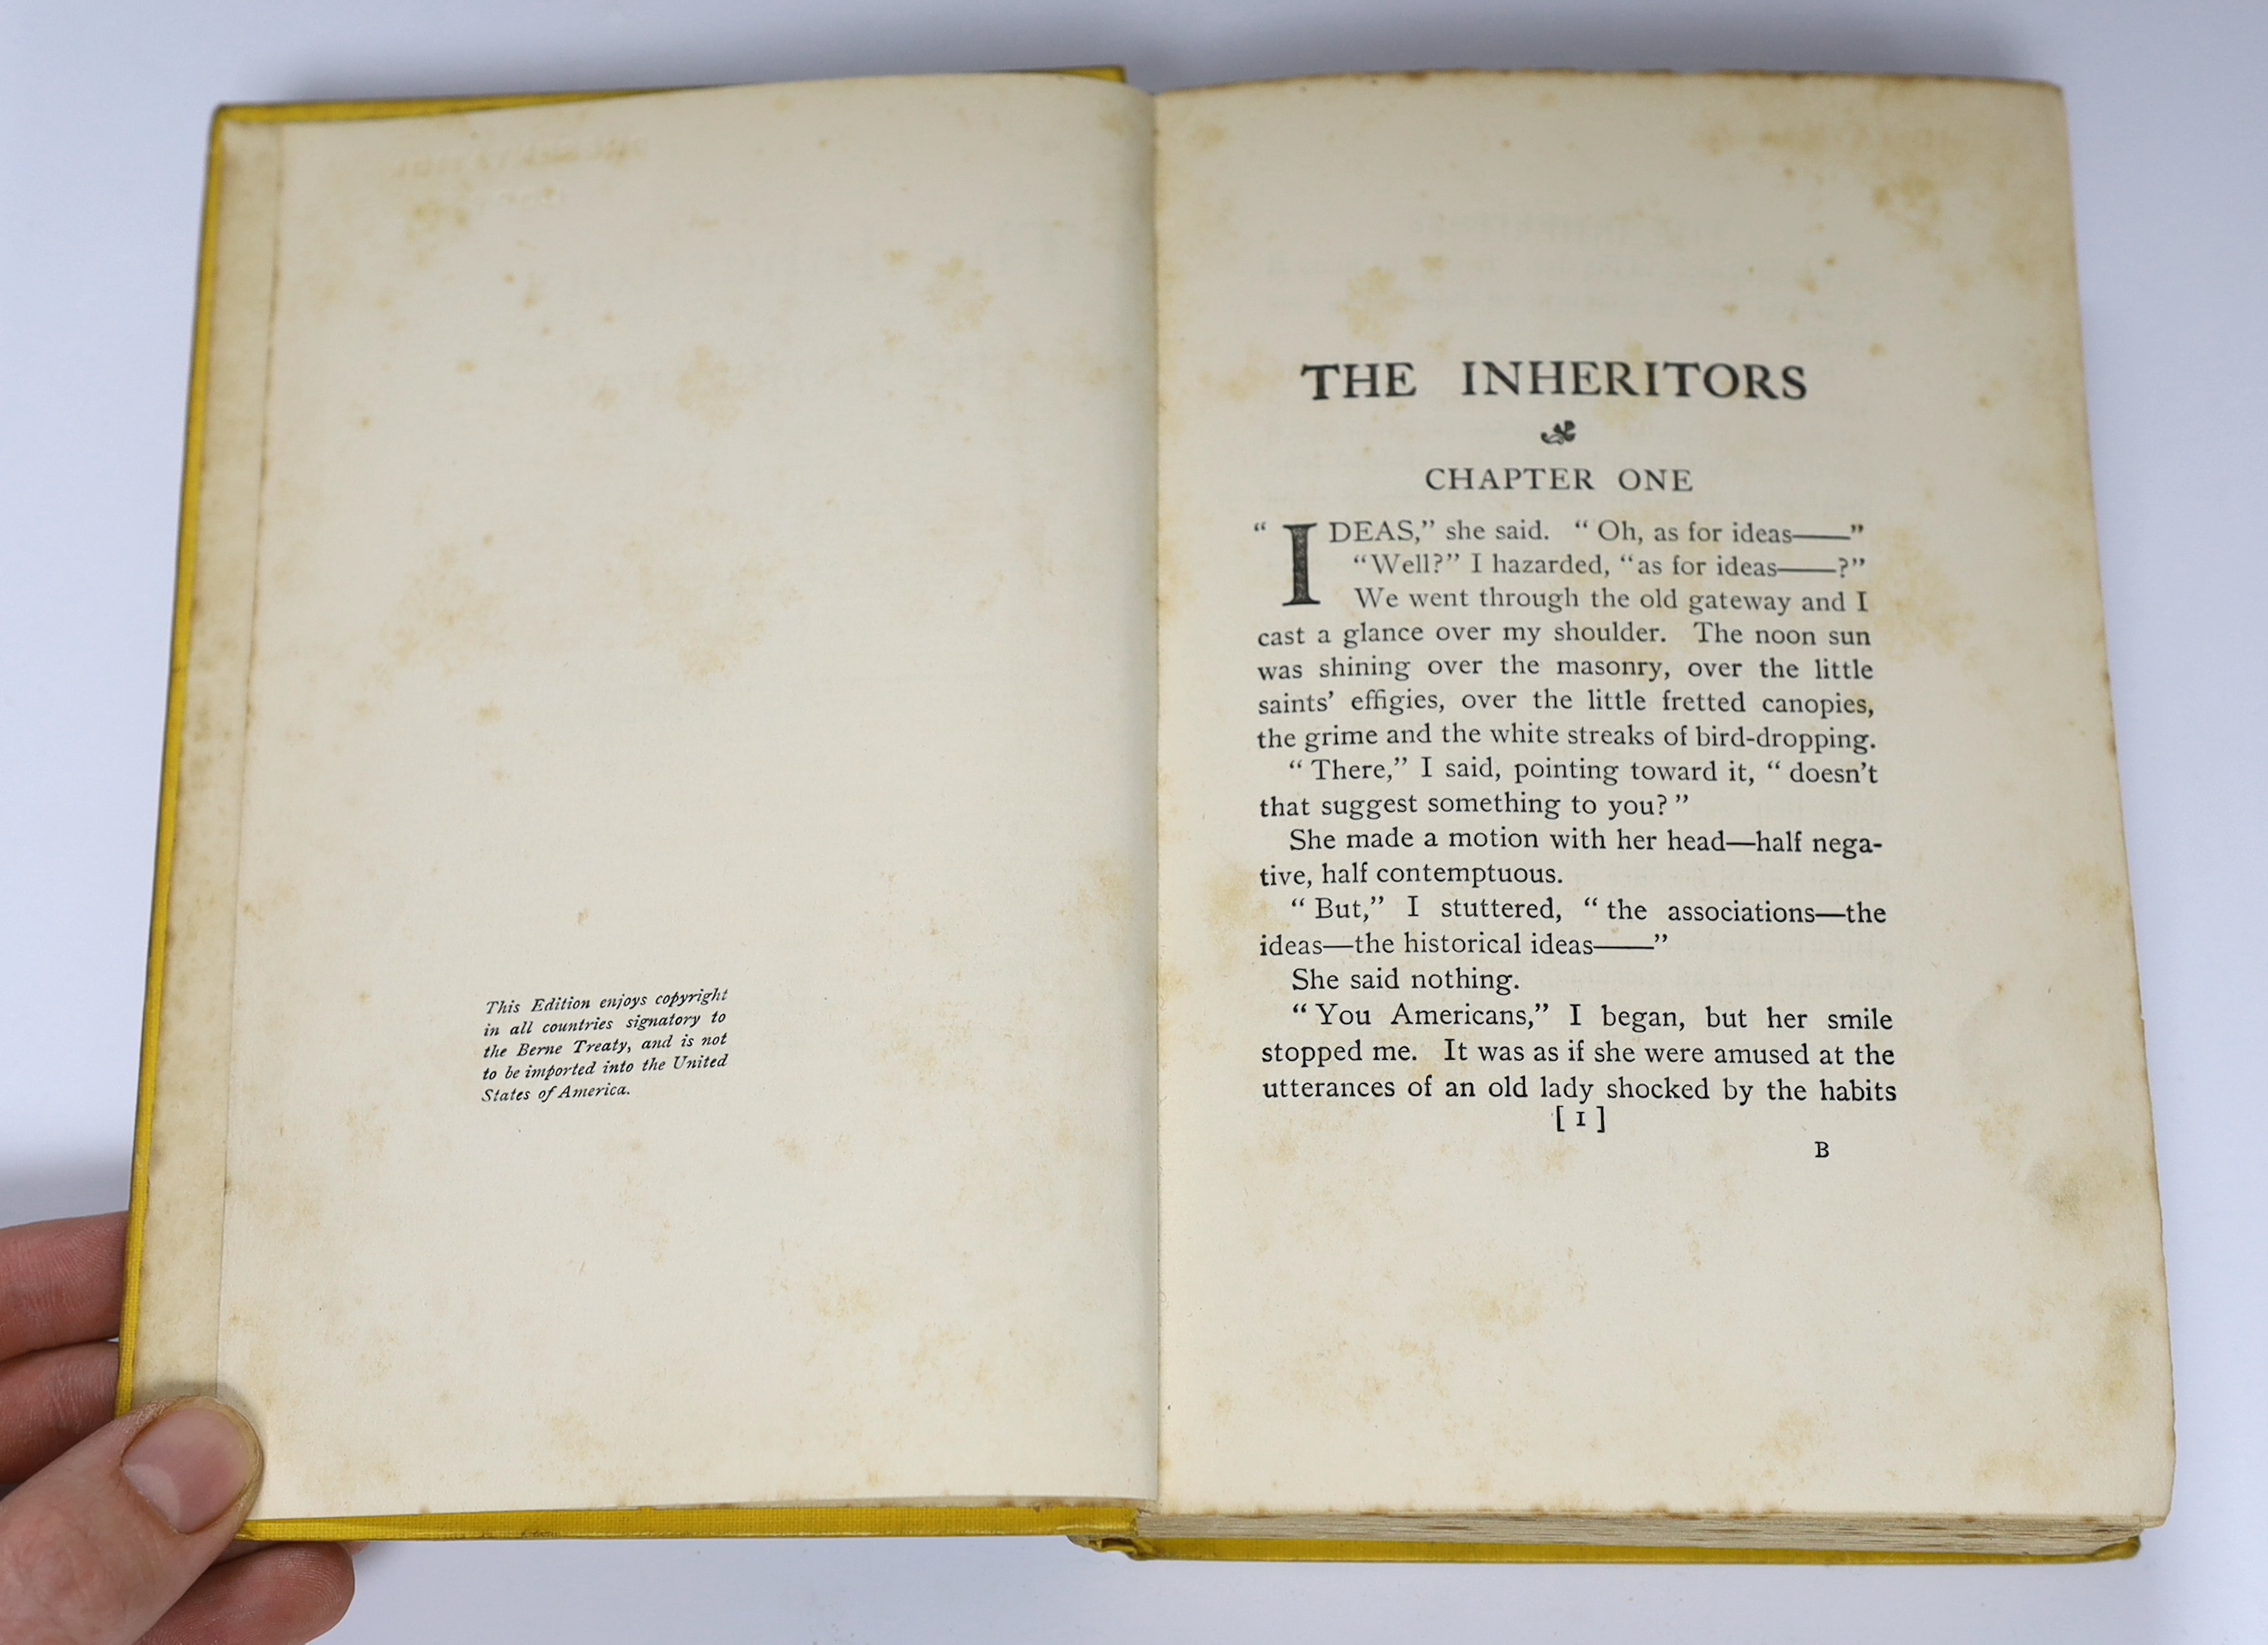 Conrad, Joseph and Hueffer, Ford Madox - The Inheritors: An Extravagant Story, 1st English edition, 8vo, yellow pictorial cloth, without dedication leaf later inserted in some copies, lacks front endpaper and half title,